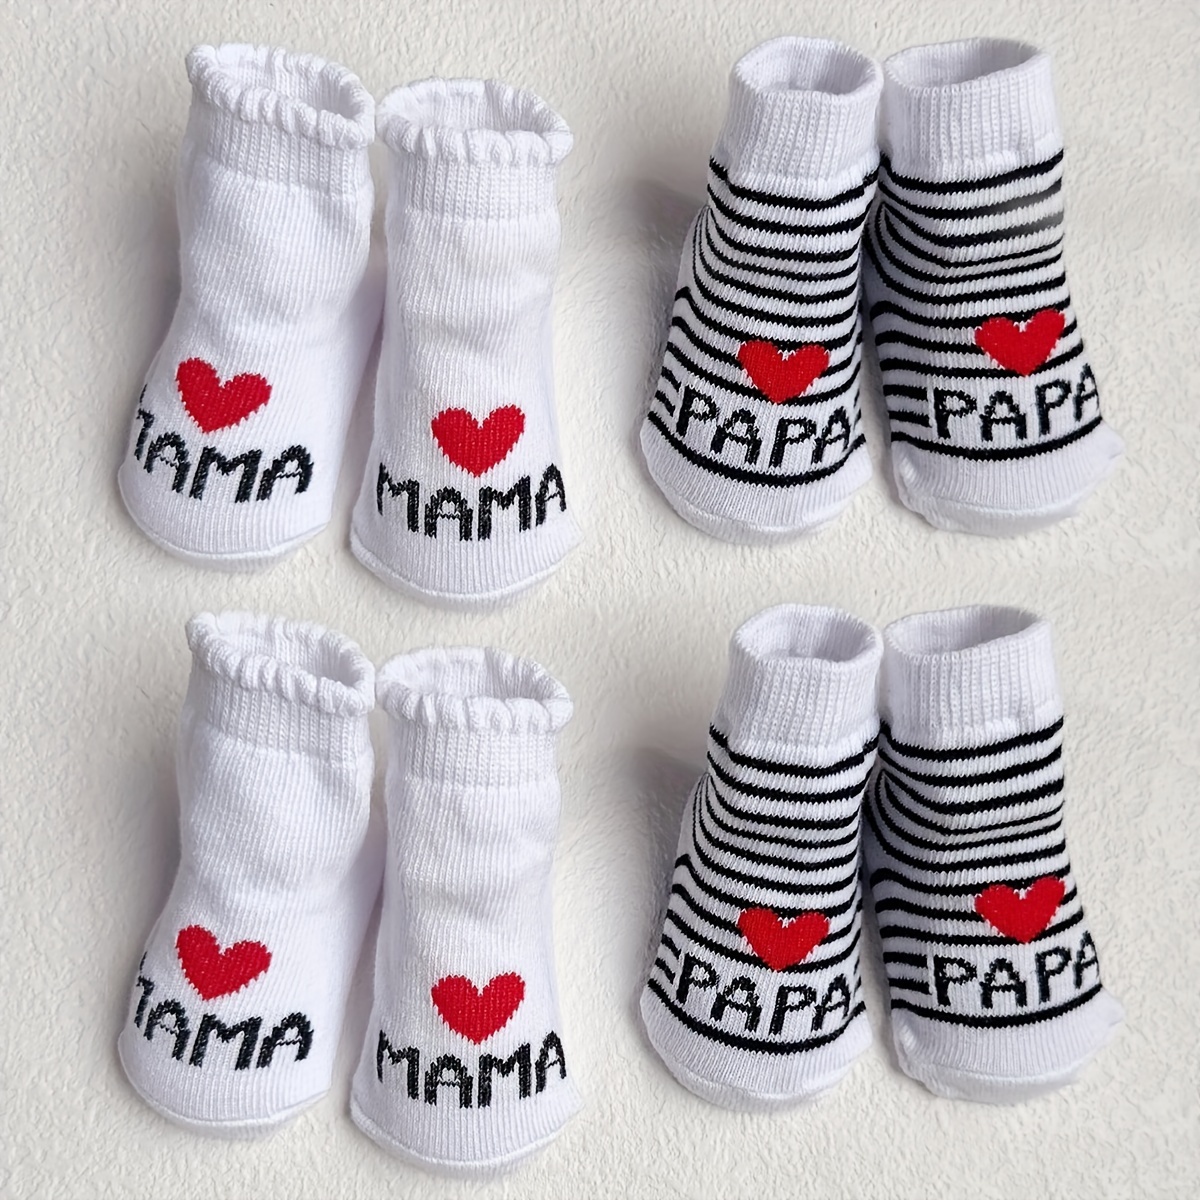 

4 Pairs Of Baby's Cute Low-cut Ankle Socks, Love Papa & Mama Pattern, Soft Comfy Children's Socks For Boys Girls All Seasons Wearing